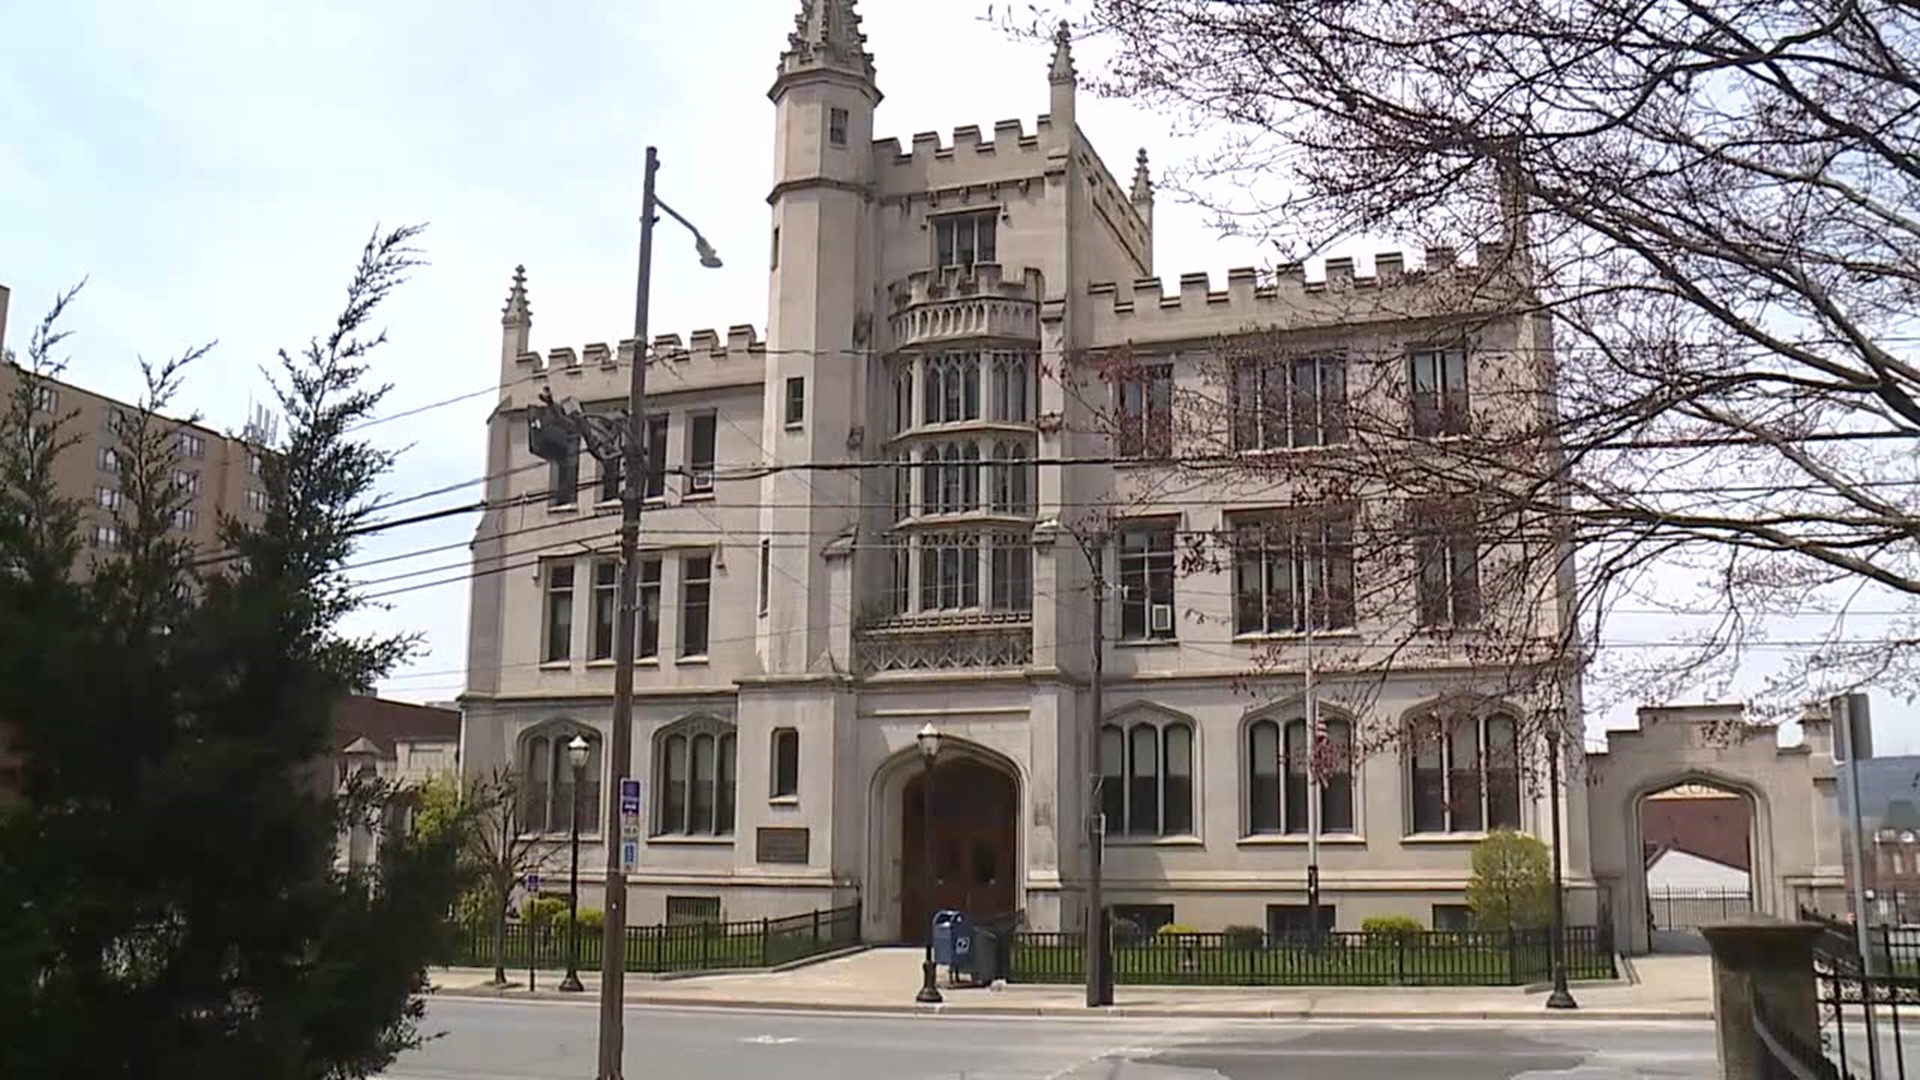 Students in the Scranton School District will look a little different. The school board Monday night voted to make a change.